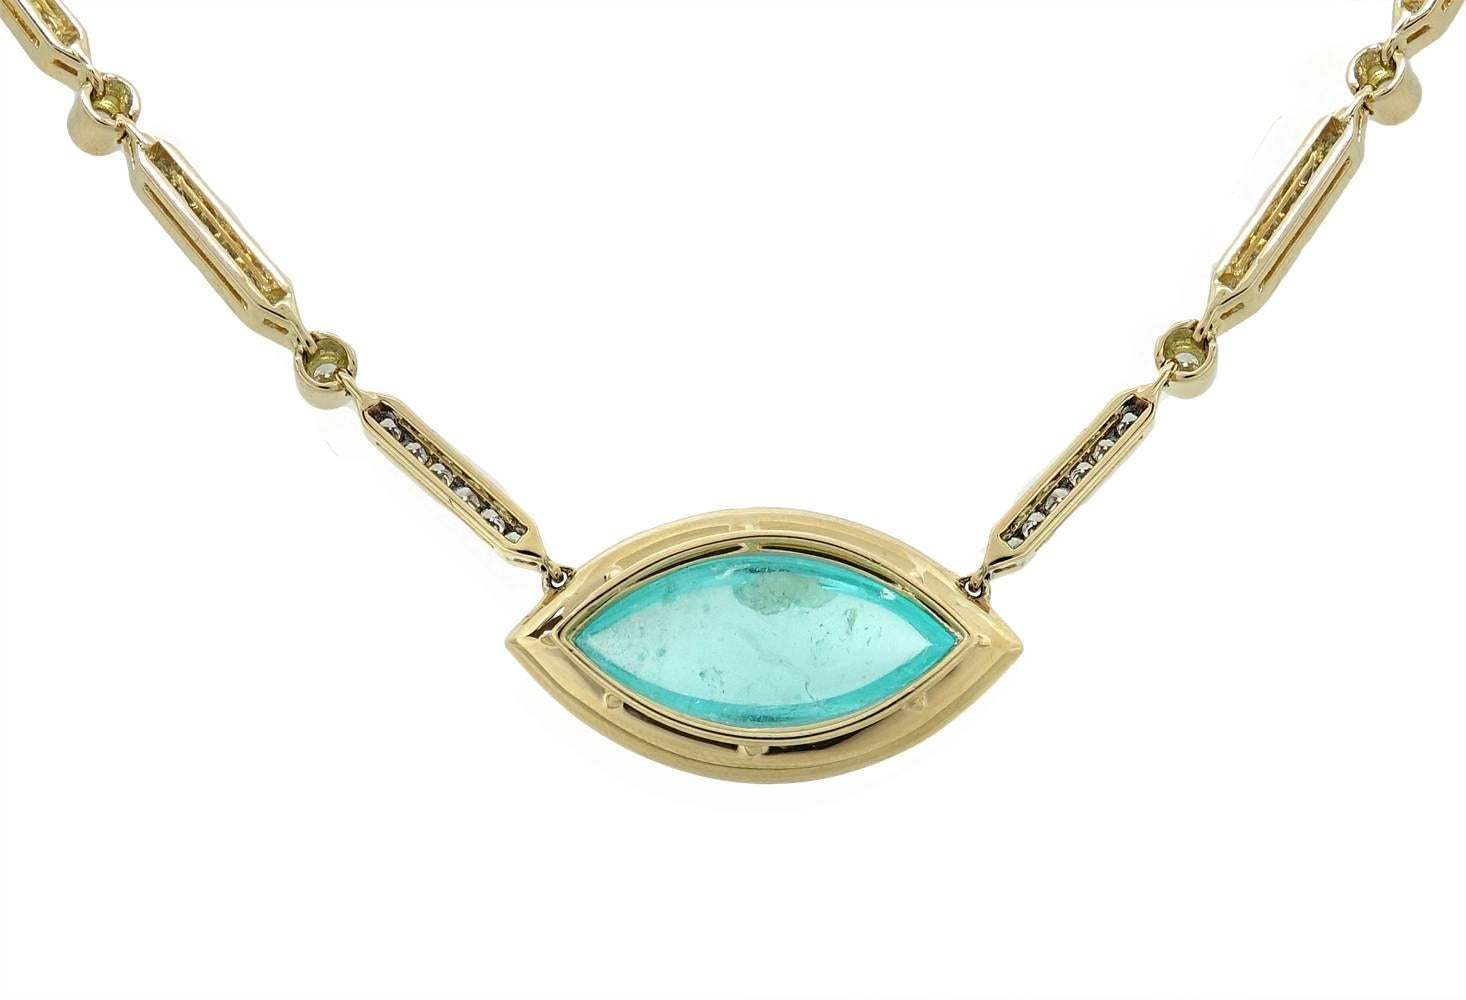 This Exceptional Pamela Huizenga 18K Yellow Gold Necklace Has A Stunning Marquise Shaped Paraiba Tourmaline In The Center Weighing A Total Carat Weight Of 15.32 Carats. Diamonds Outline The Light Blue Tourmaline and Links Of The Necklace Weighing A